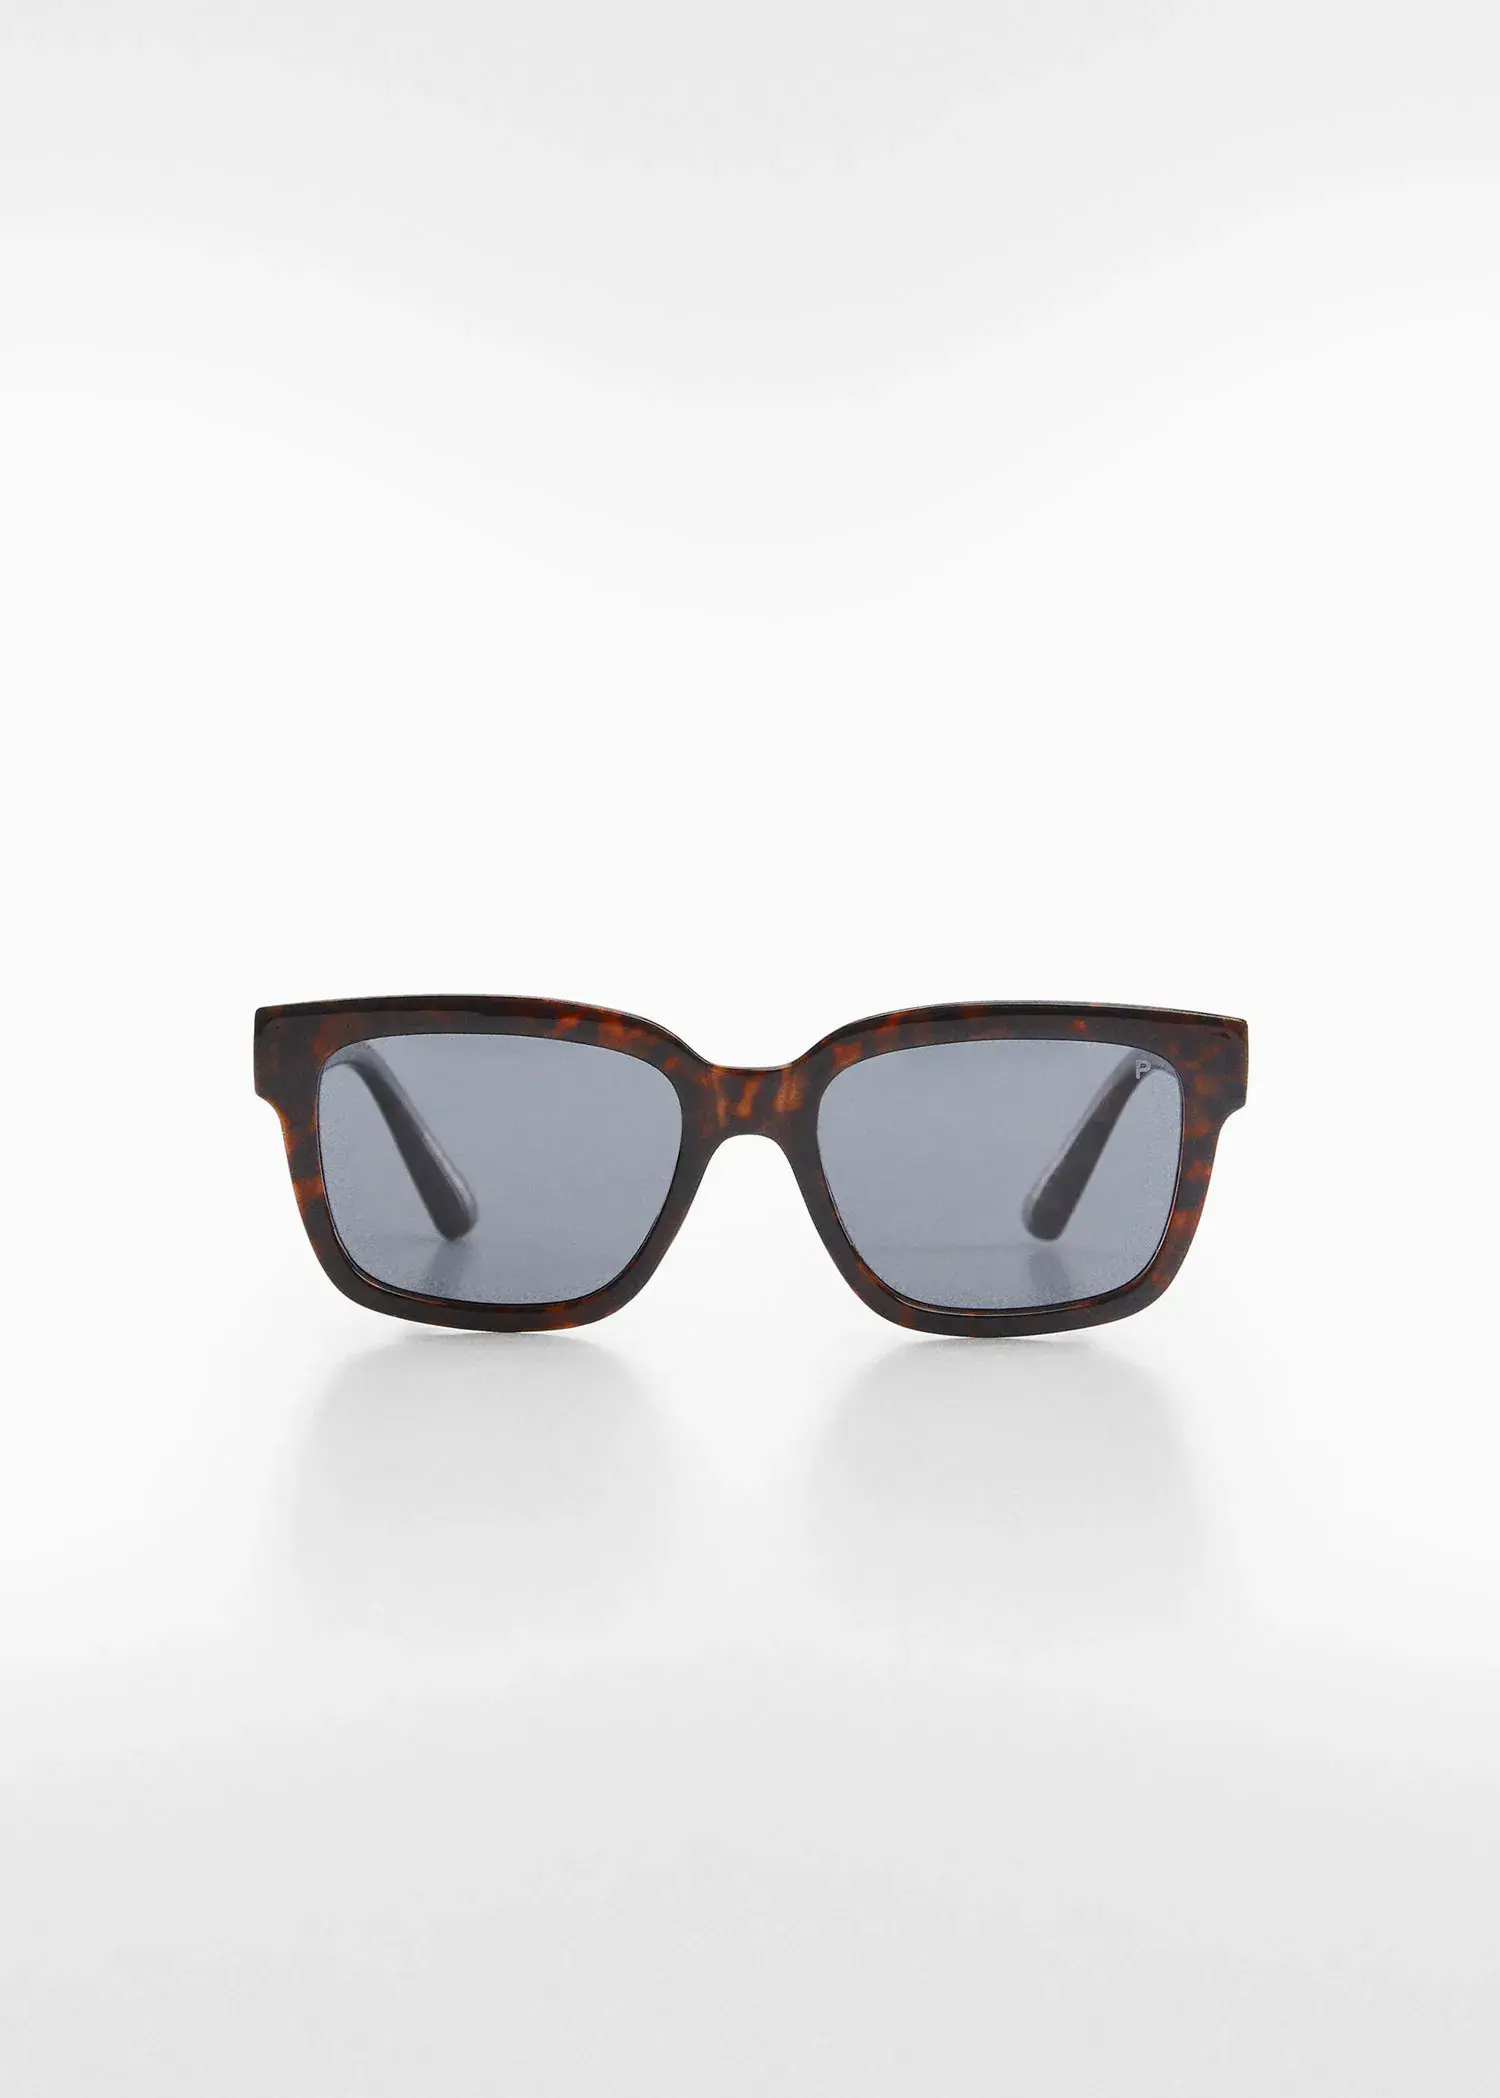 Mango Polarised sunglasses. a pair of sunglasses sitting on top of a white table. 